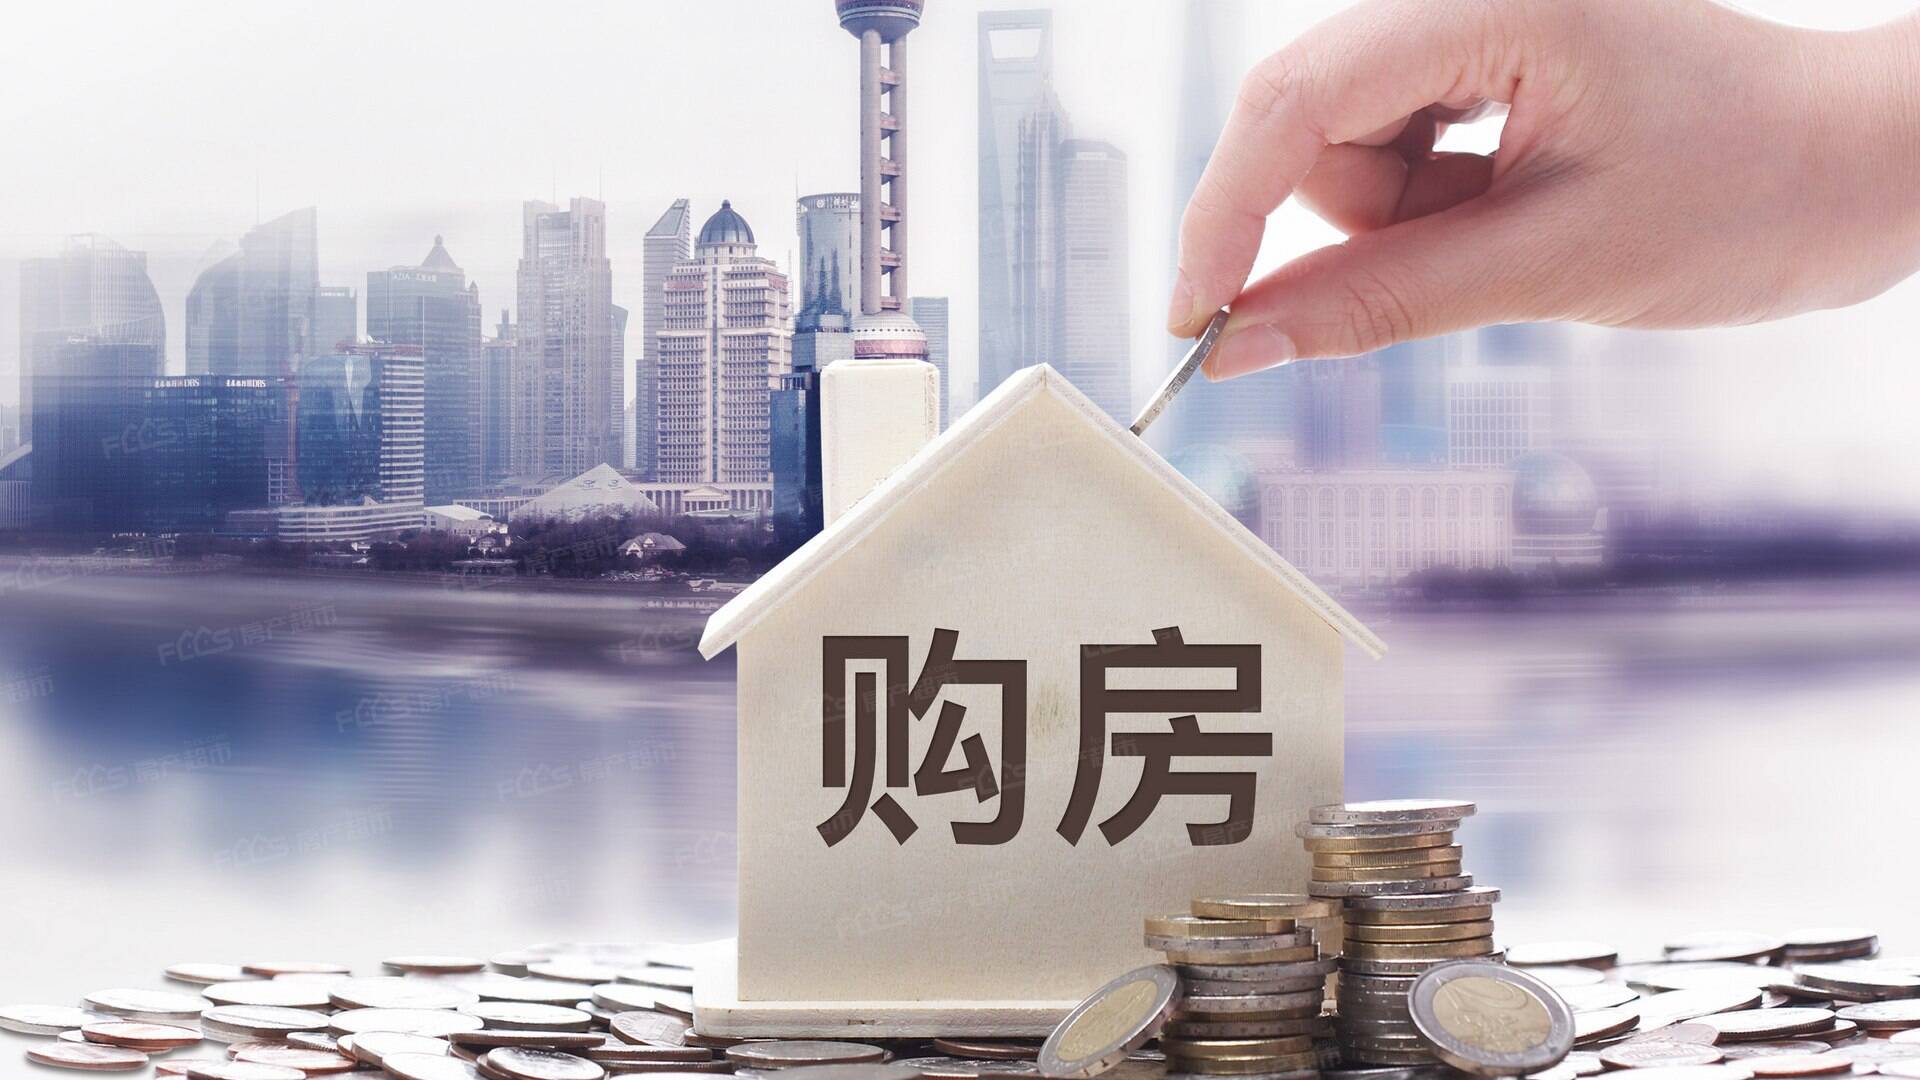  The first successful transaction of "old for new" in Wuhan real estate